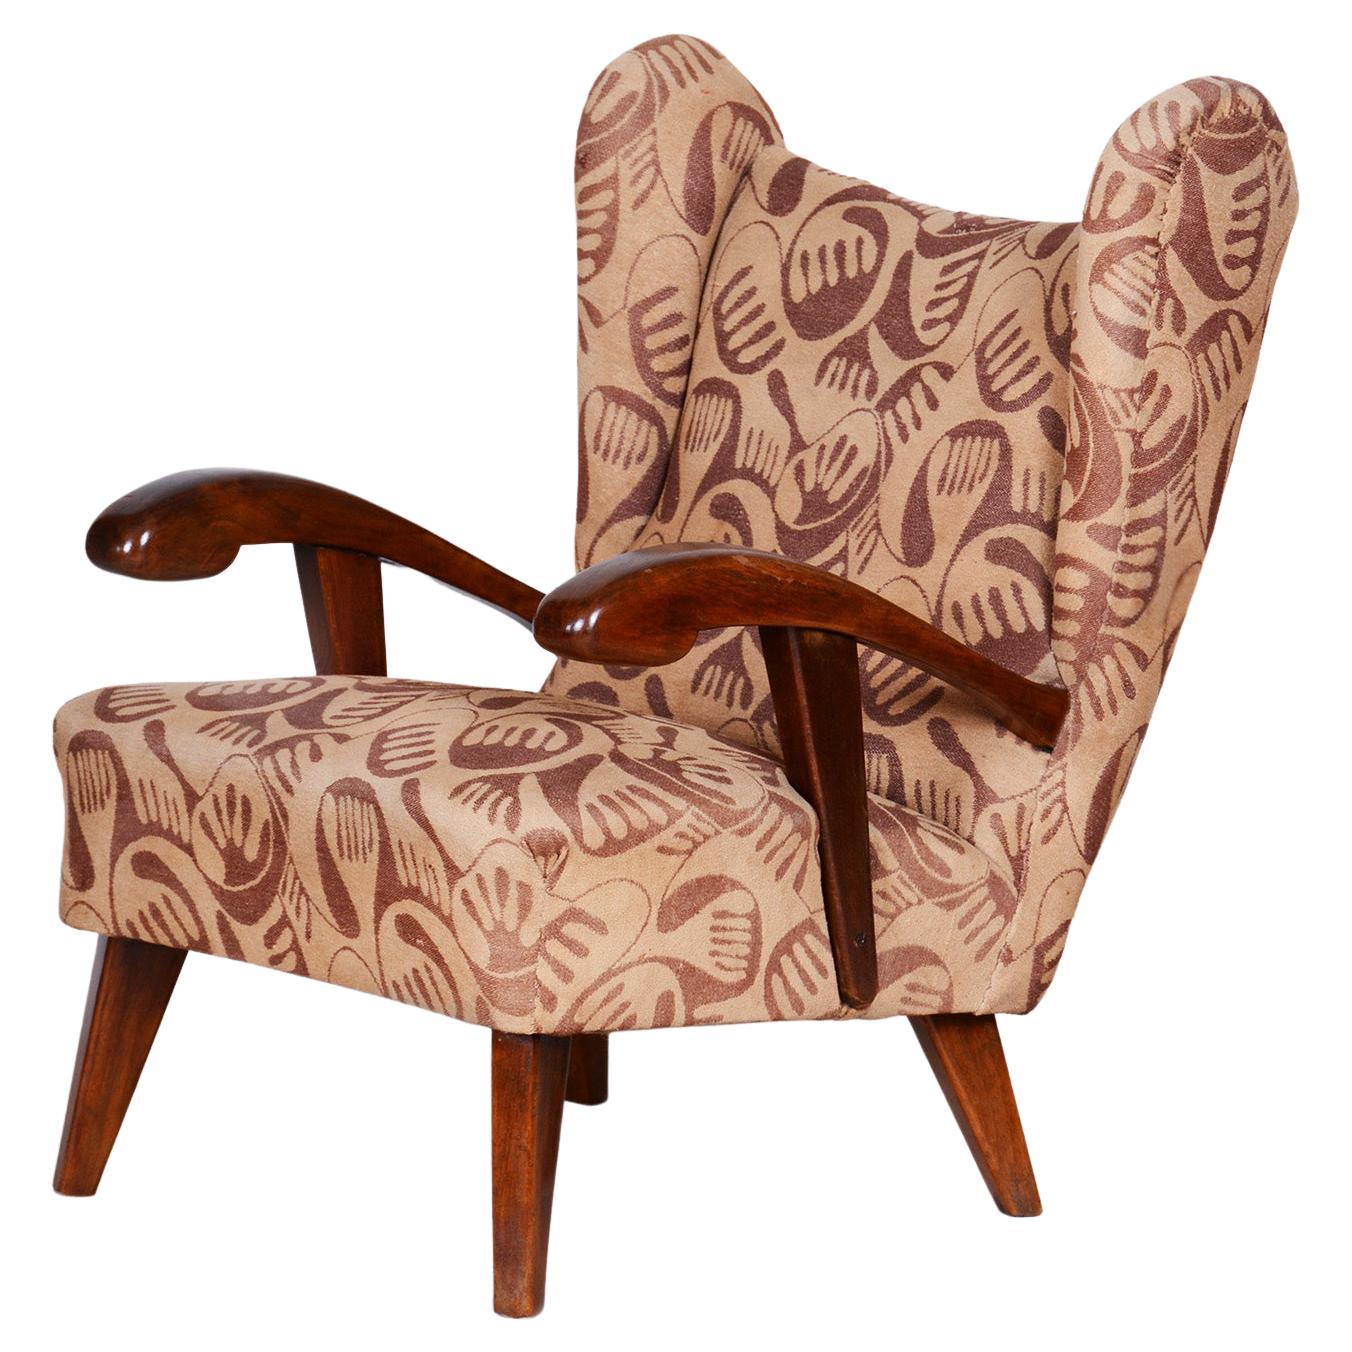 Brown Art Deco Armchair, Made in 1930s Czechia For Sale